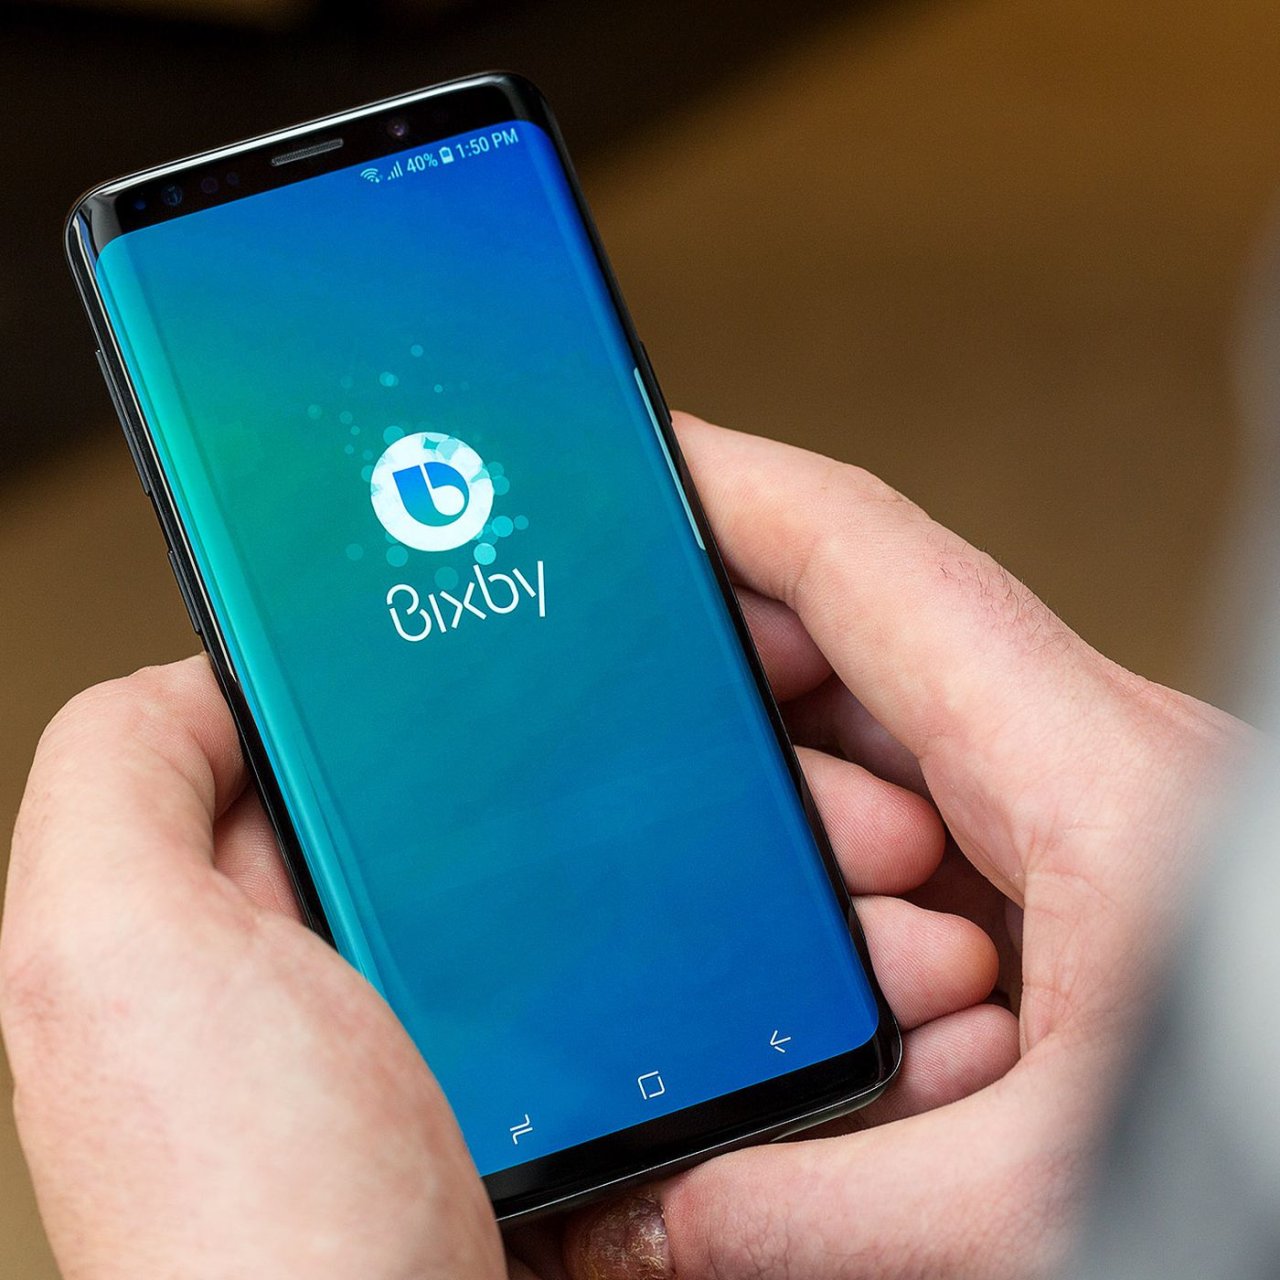 Bixby can answer calls with your voice